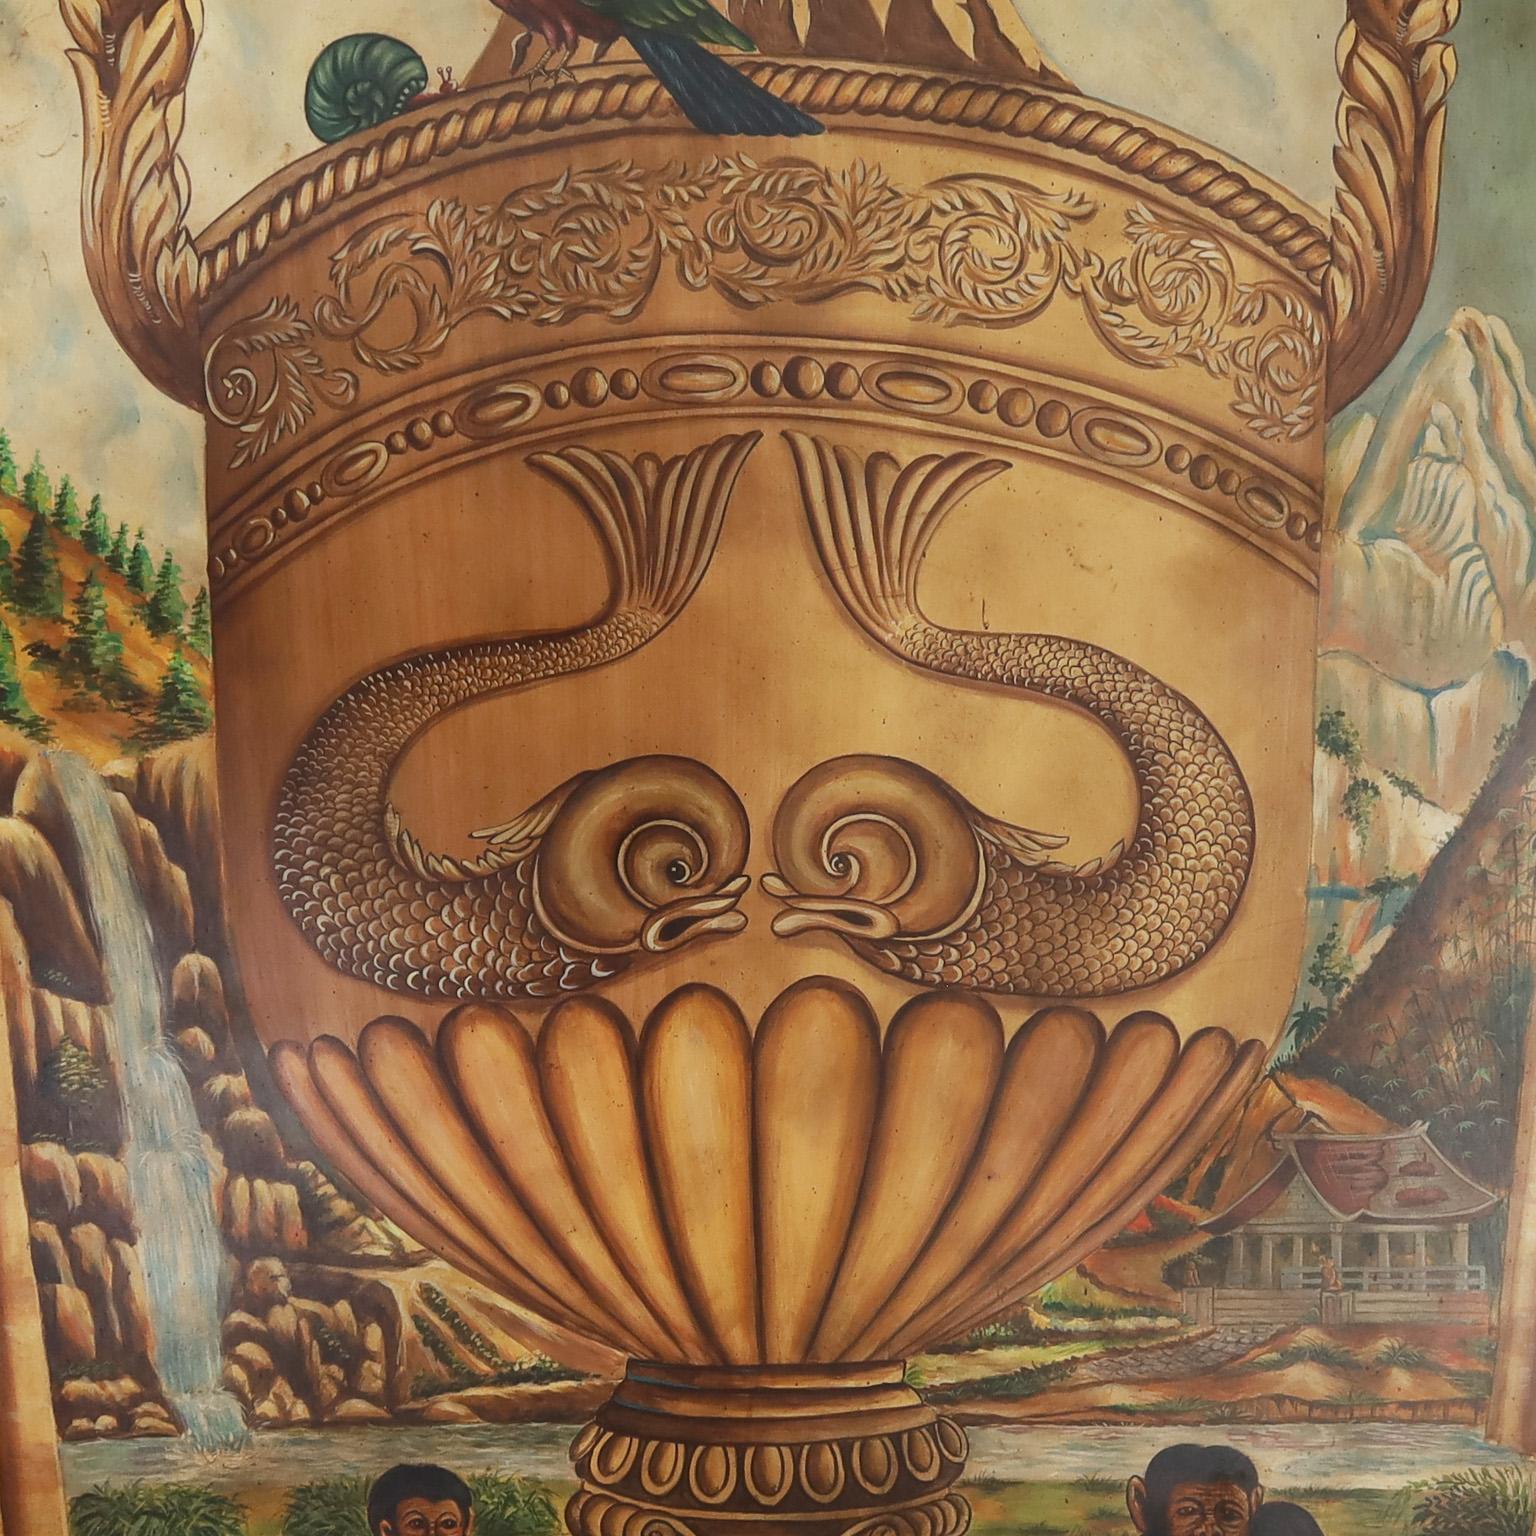 Philippine Giant Painted Panels with Urns and Monkeys